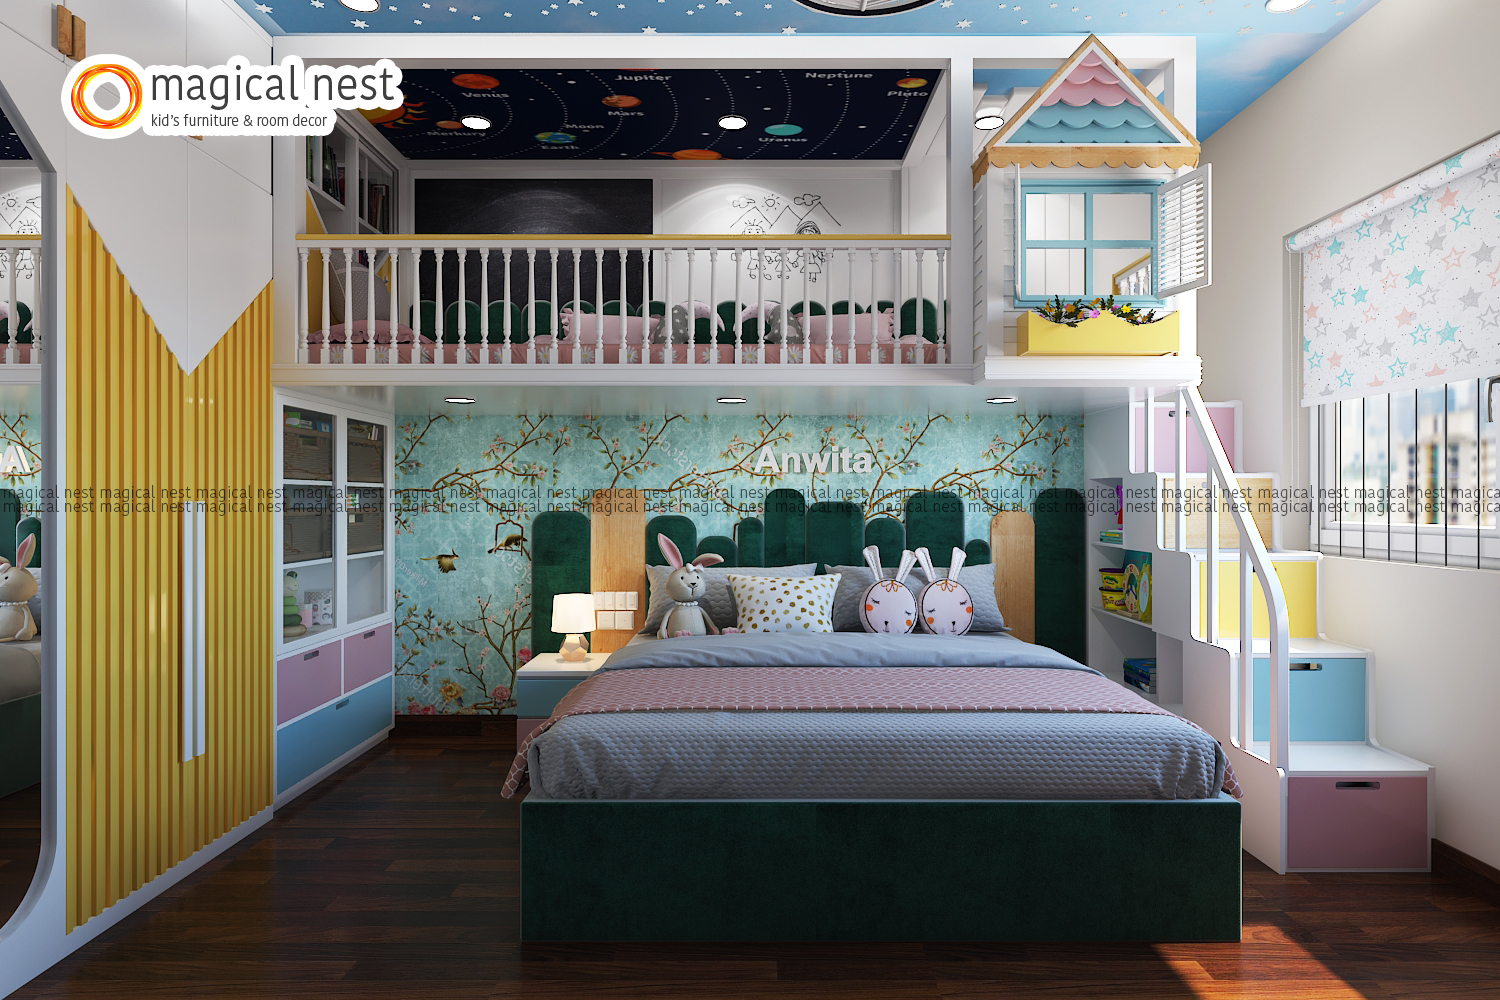 Kid's room interior design with a loft bed, wardrobe, stairs, and queen size kid's bed.  